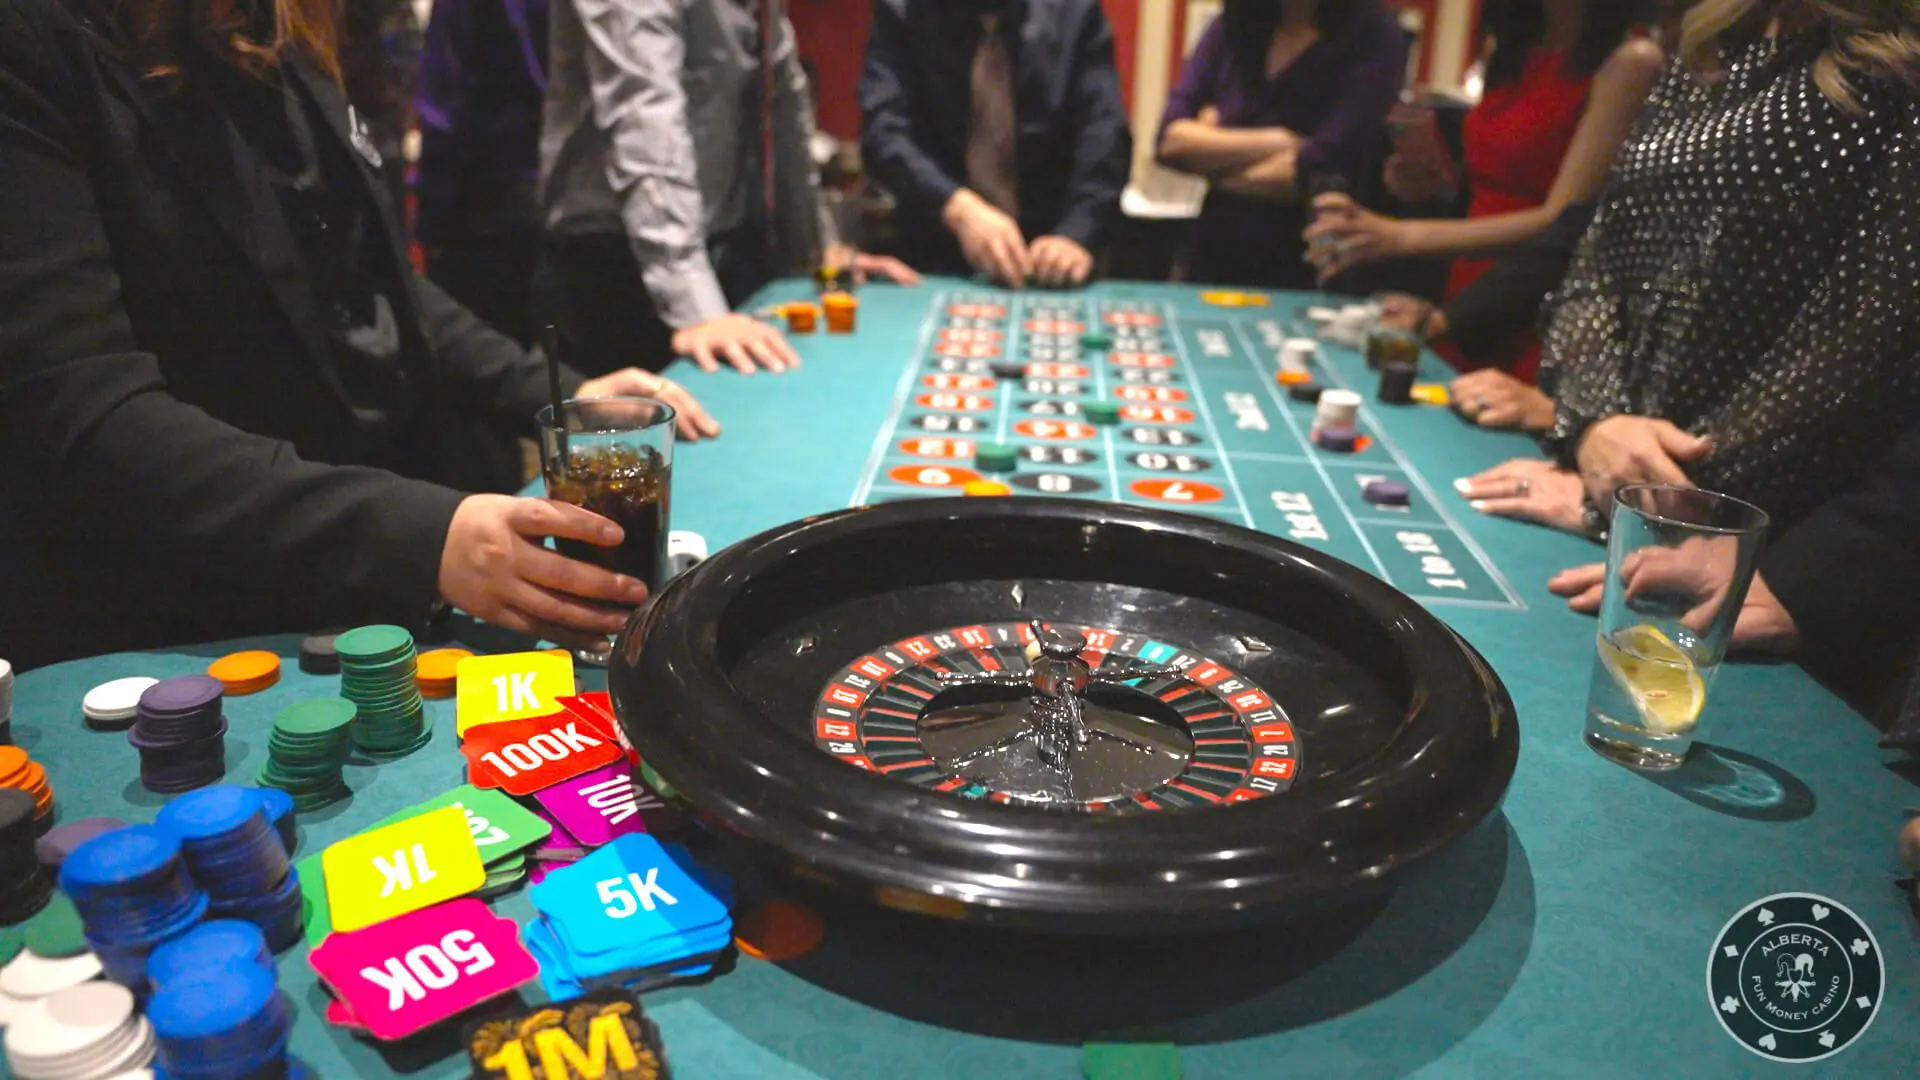 A group of people standing around a roulette table.